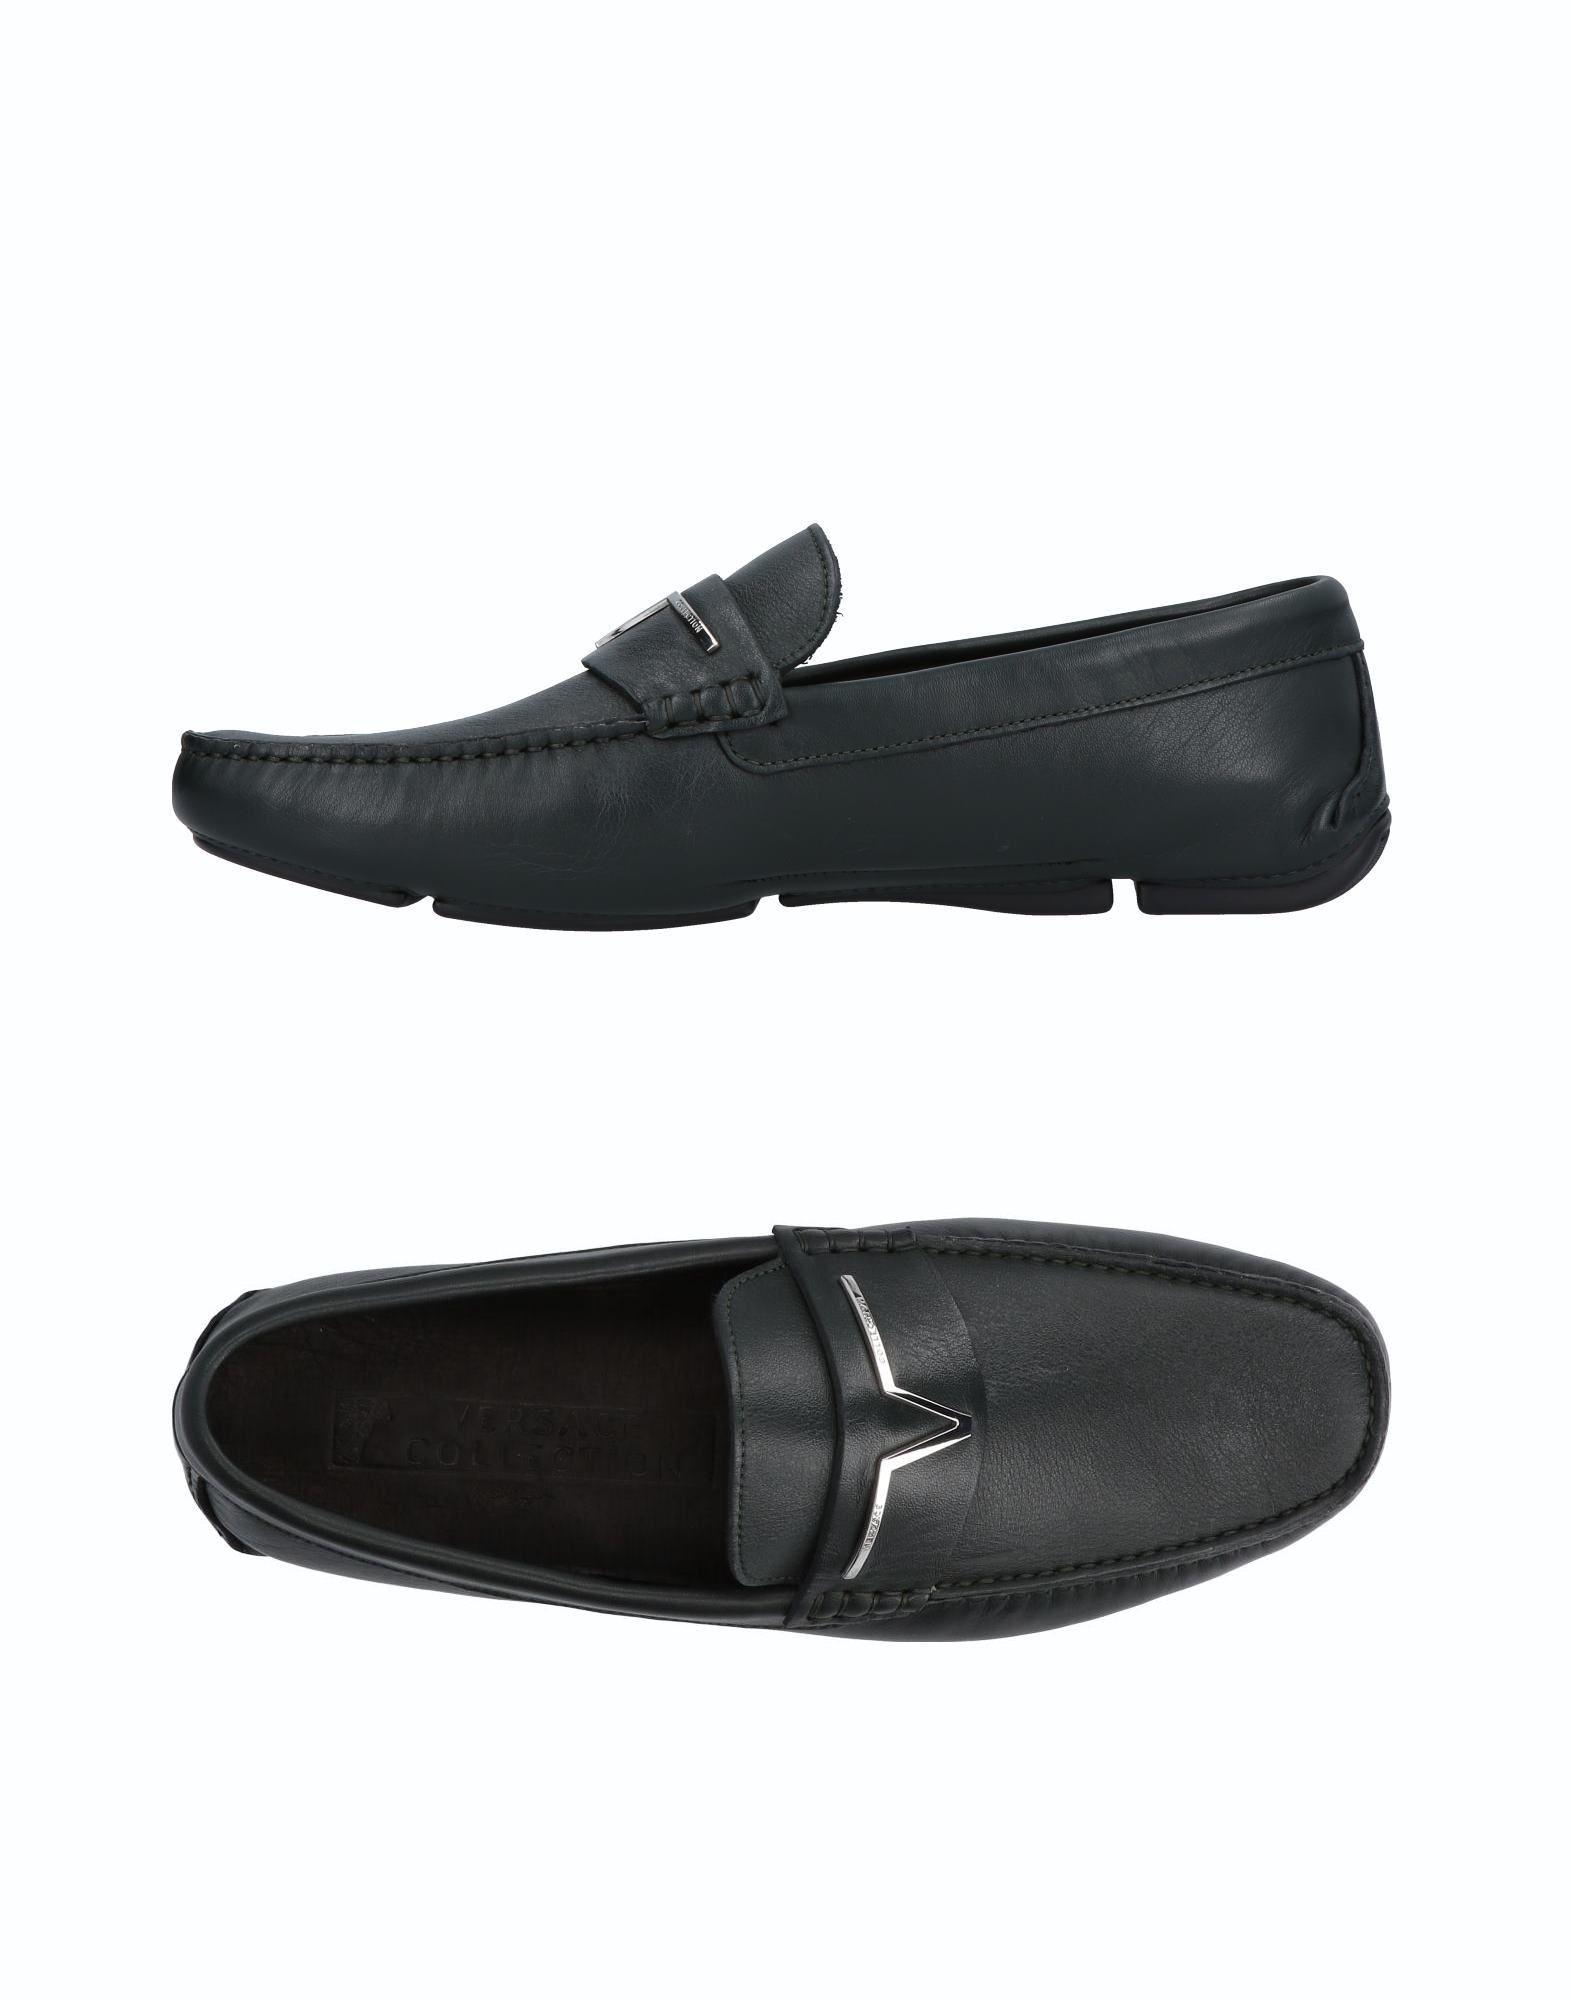 Versace Leather Loafer in Dark Green (Green) for Men - Lyst